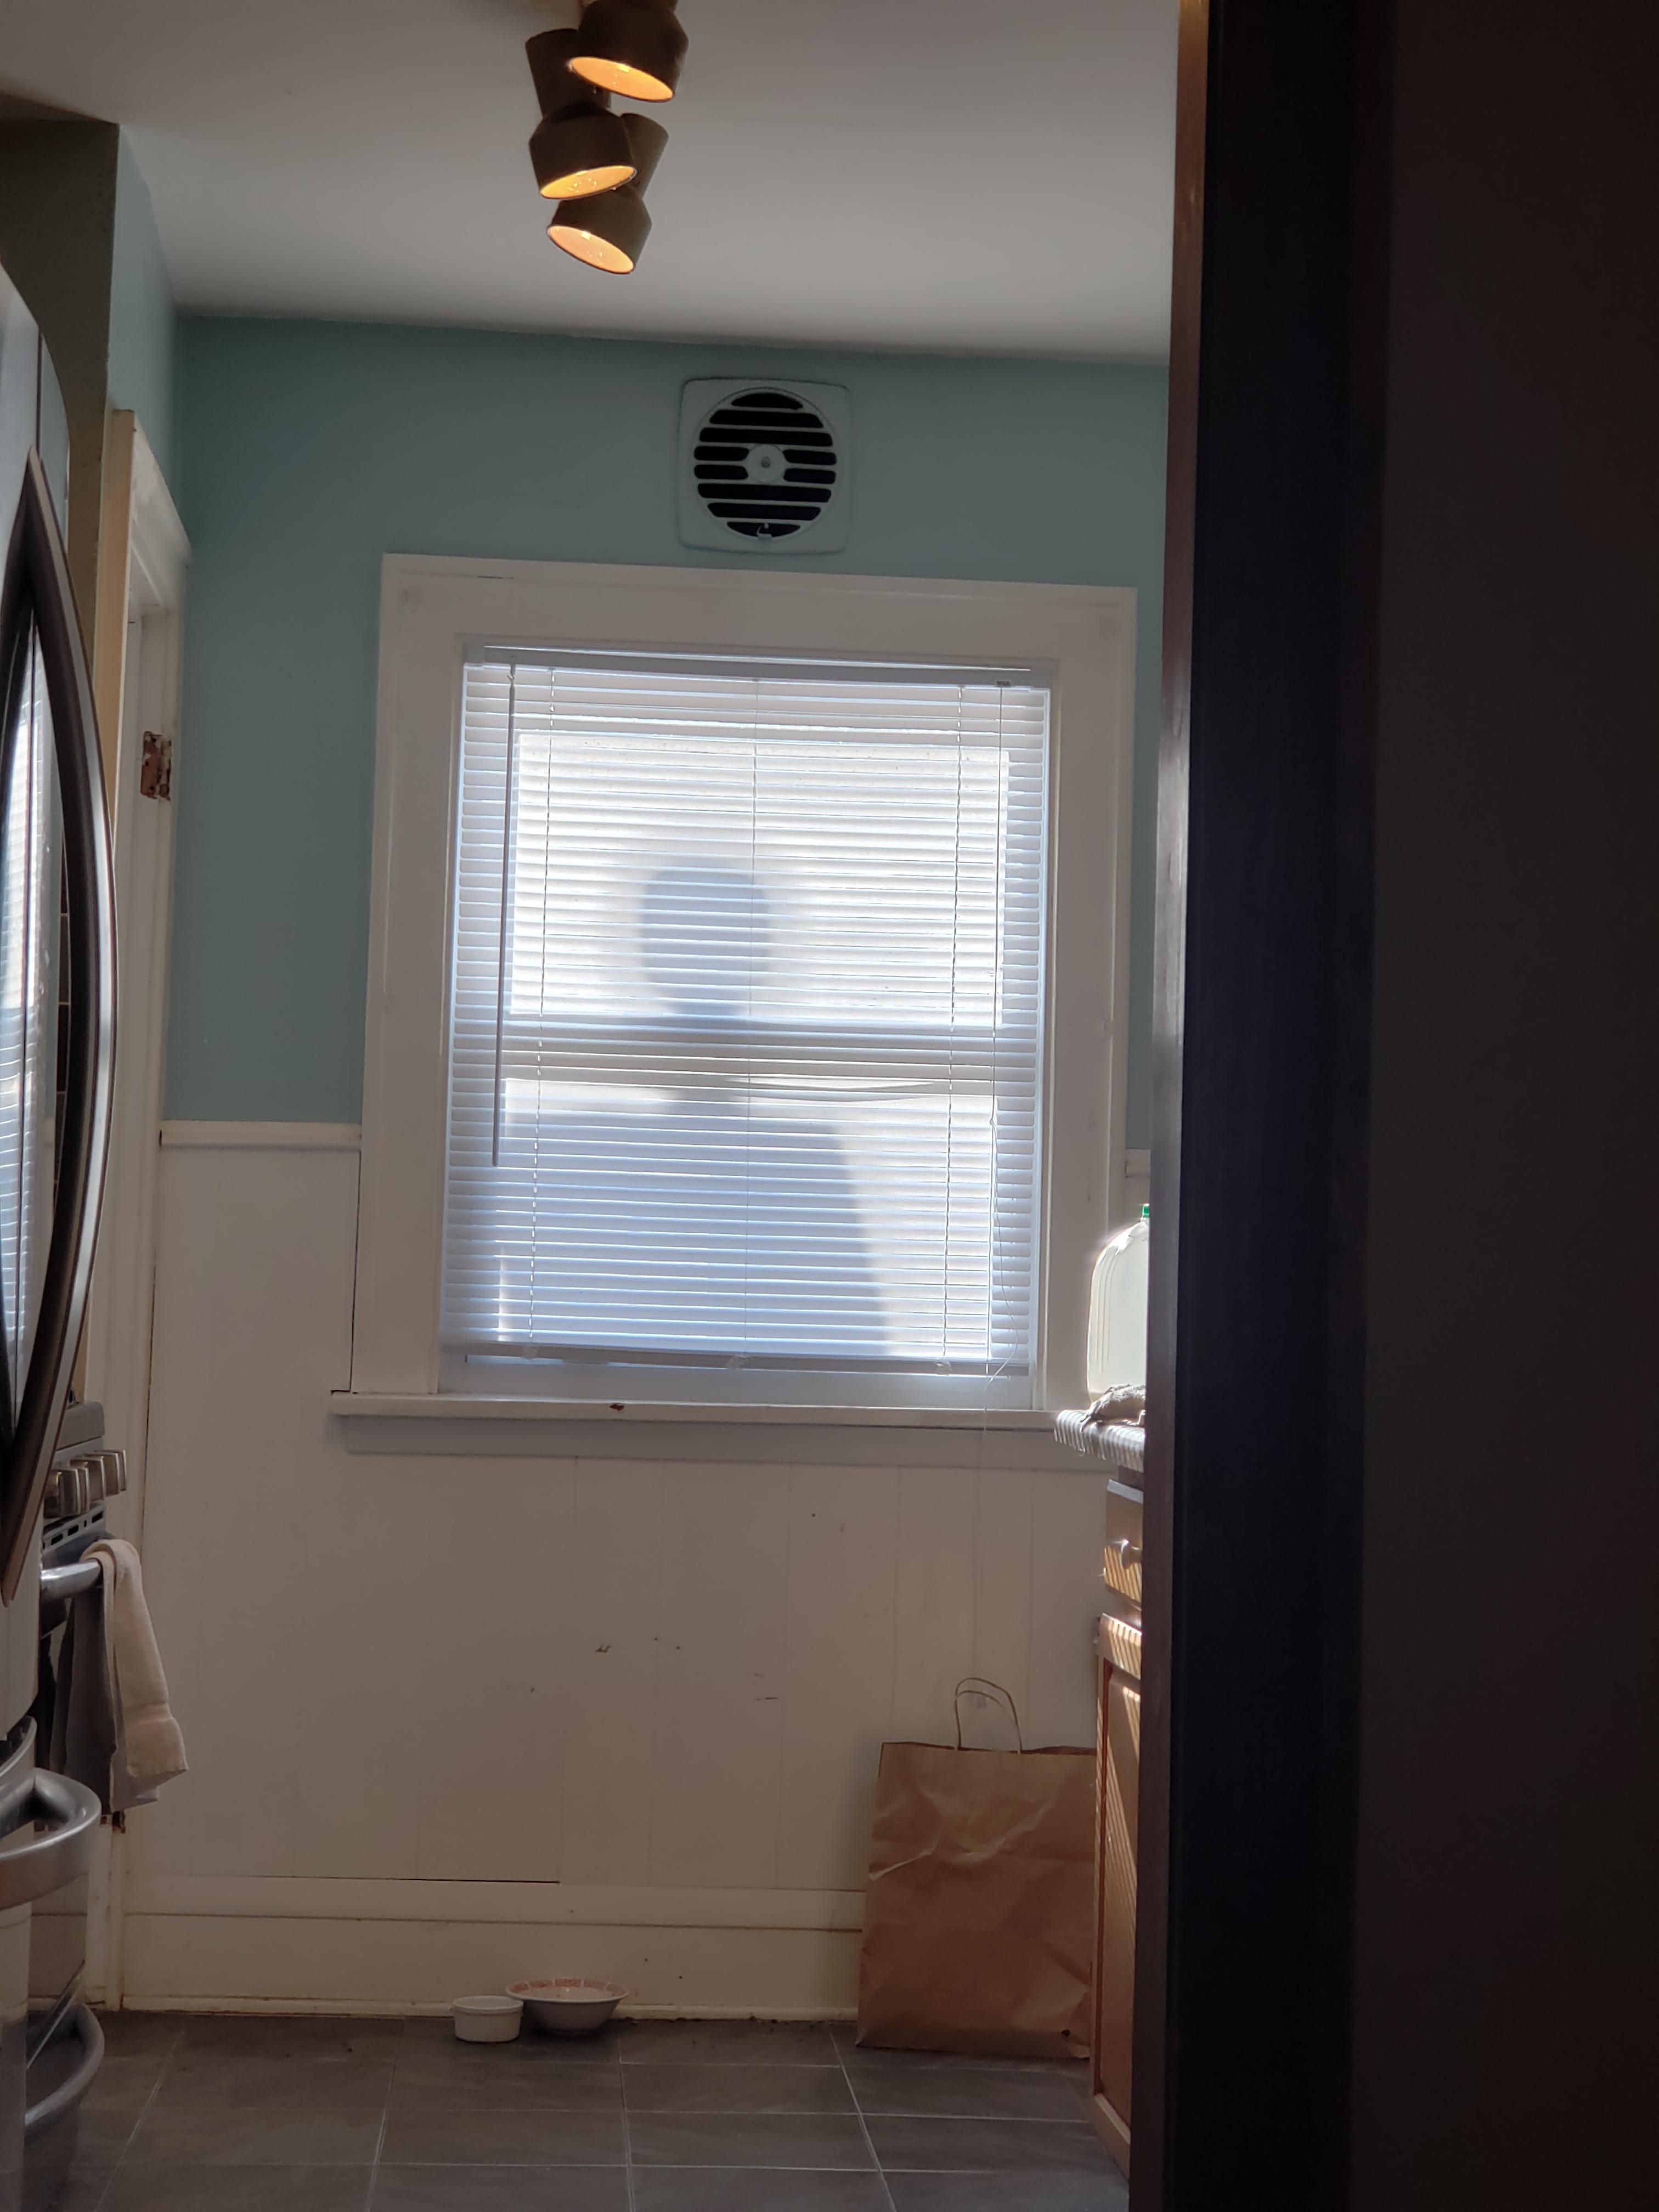 Every morning at 11 or so, windowman shows up and scares the shit out of me.